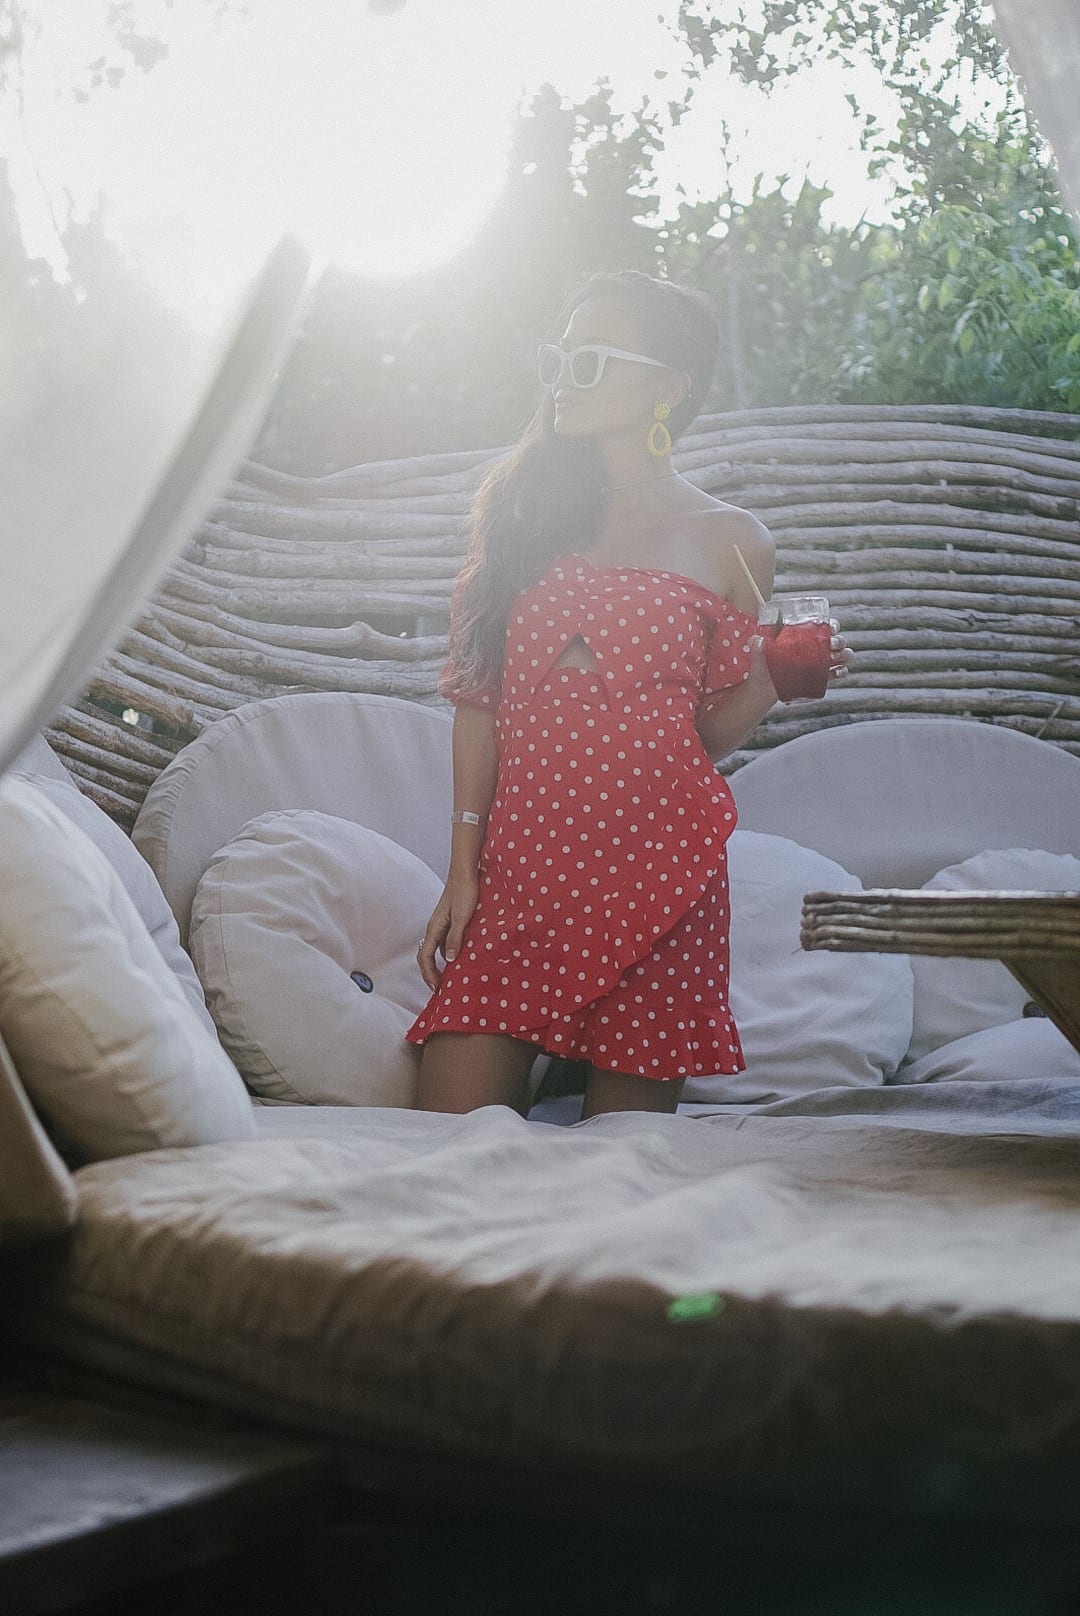 Kin Toh, Azulik, Tulum, Mexico, #travelstyle, #travelblogger, #vacationstyle, #dawnpdarnell, #houstonblogger, red polka dot dress, white cat eye sunglasses, Lisi Lerch earrings 